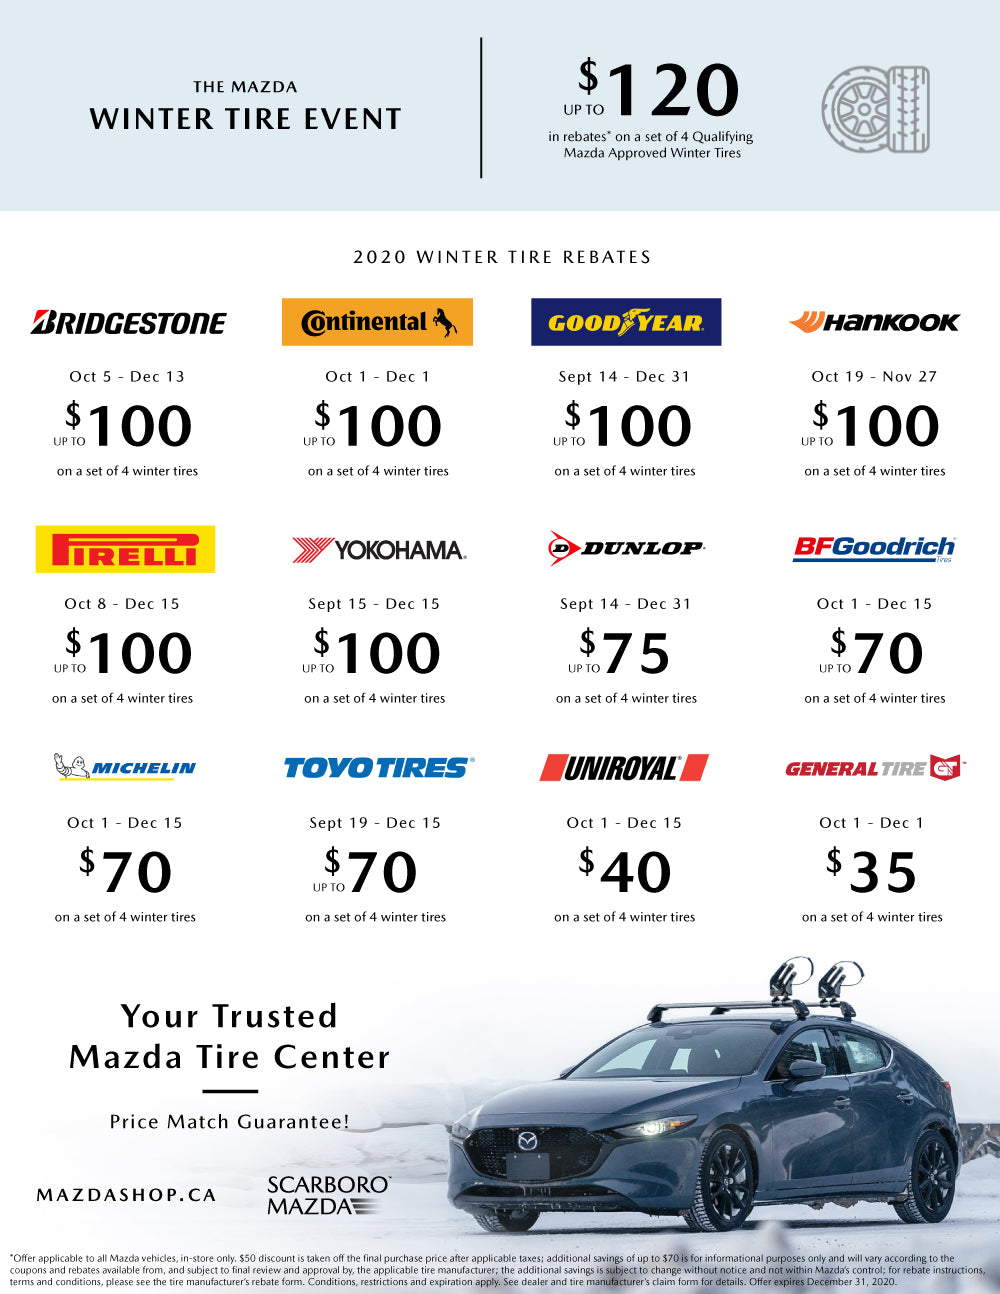 The Mazda Winter Tire Event Get Up To 120 In Total Rebates Mazda 